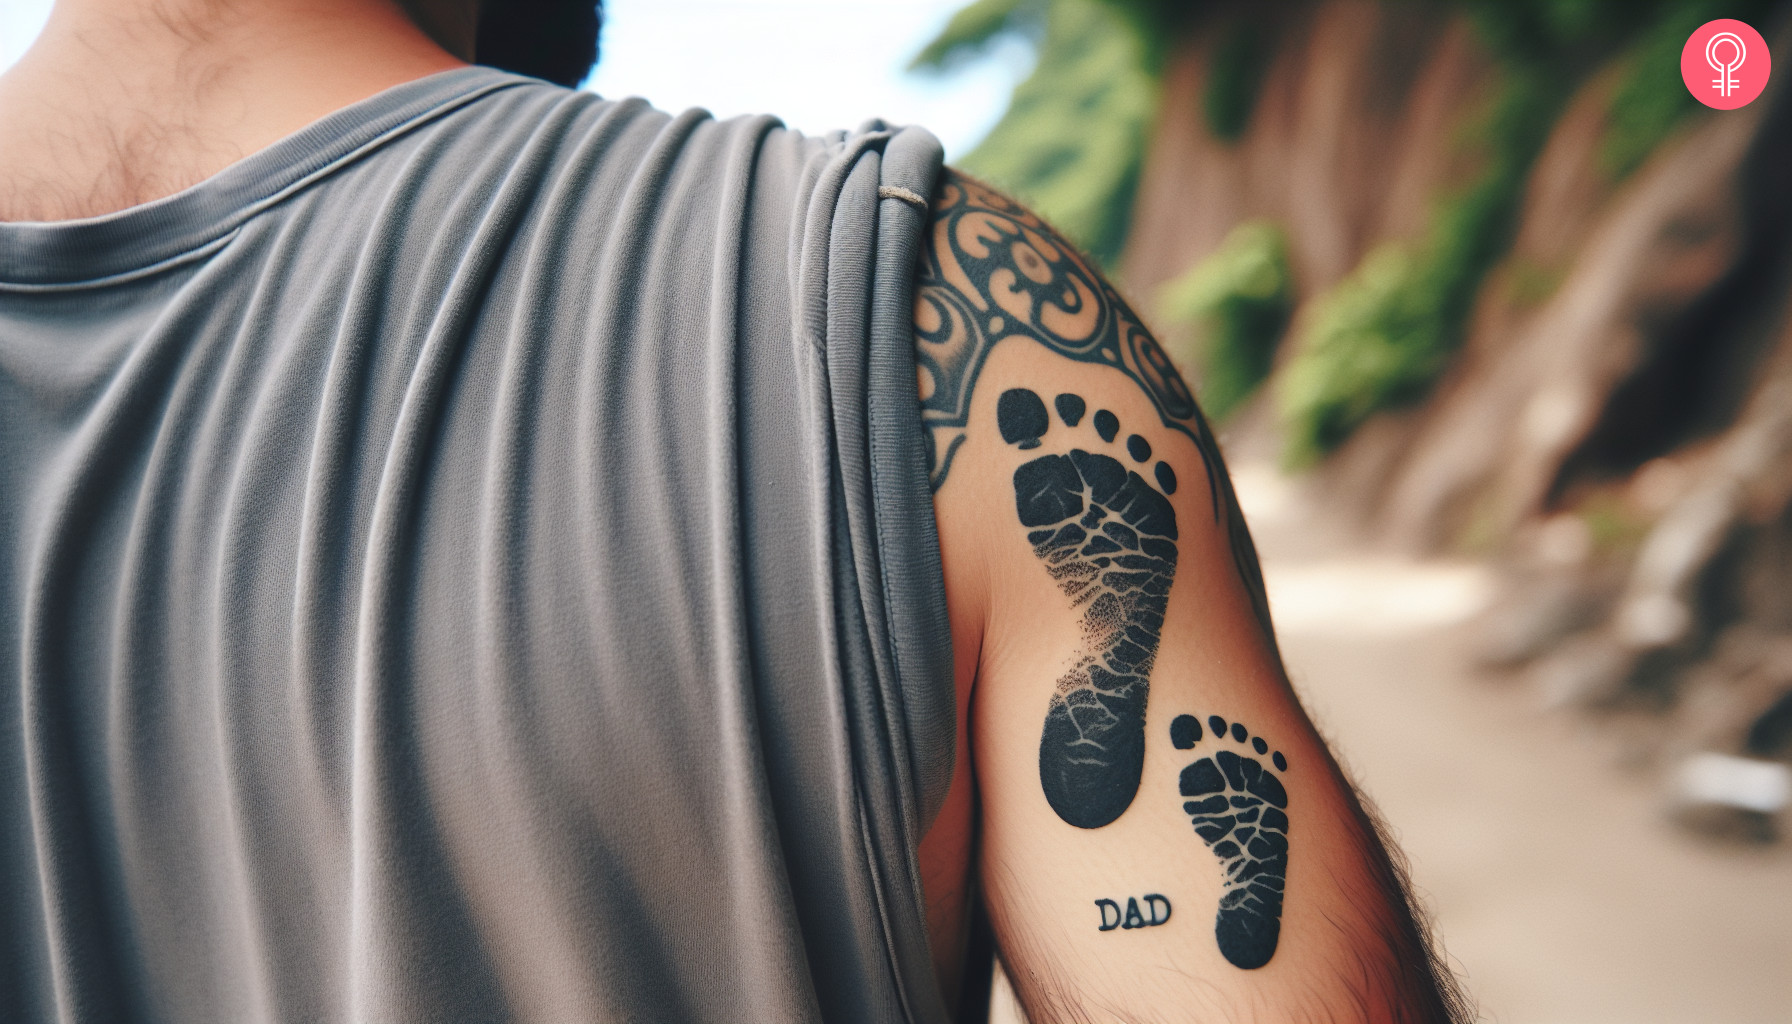 A baby footprint tattoo on the upper arm of a man